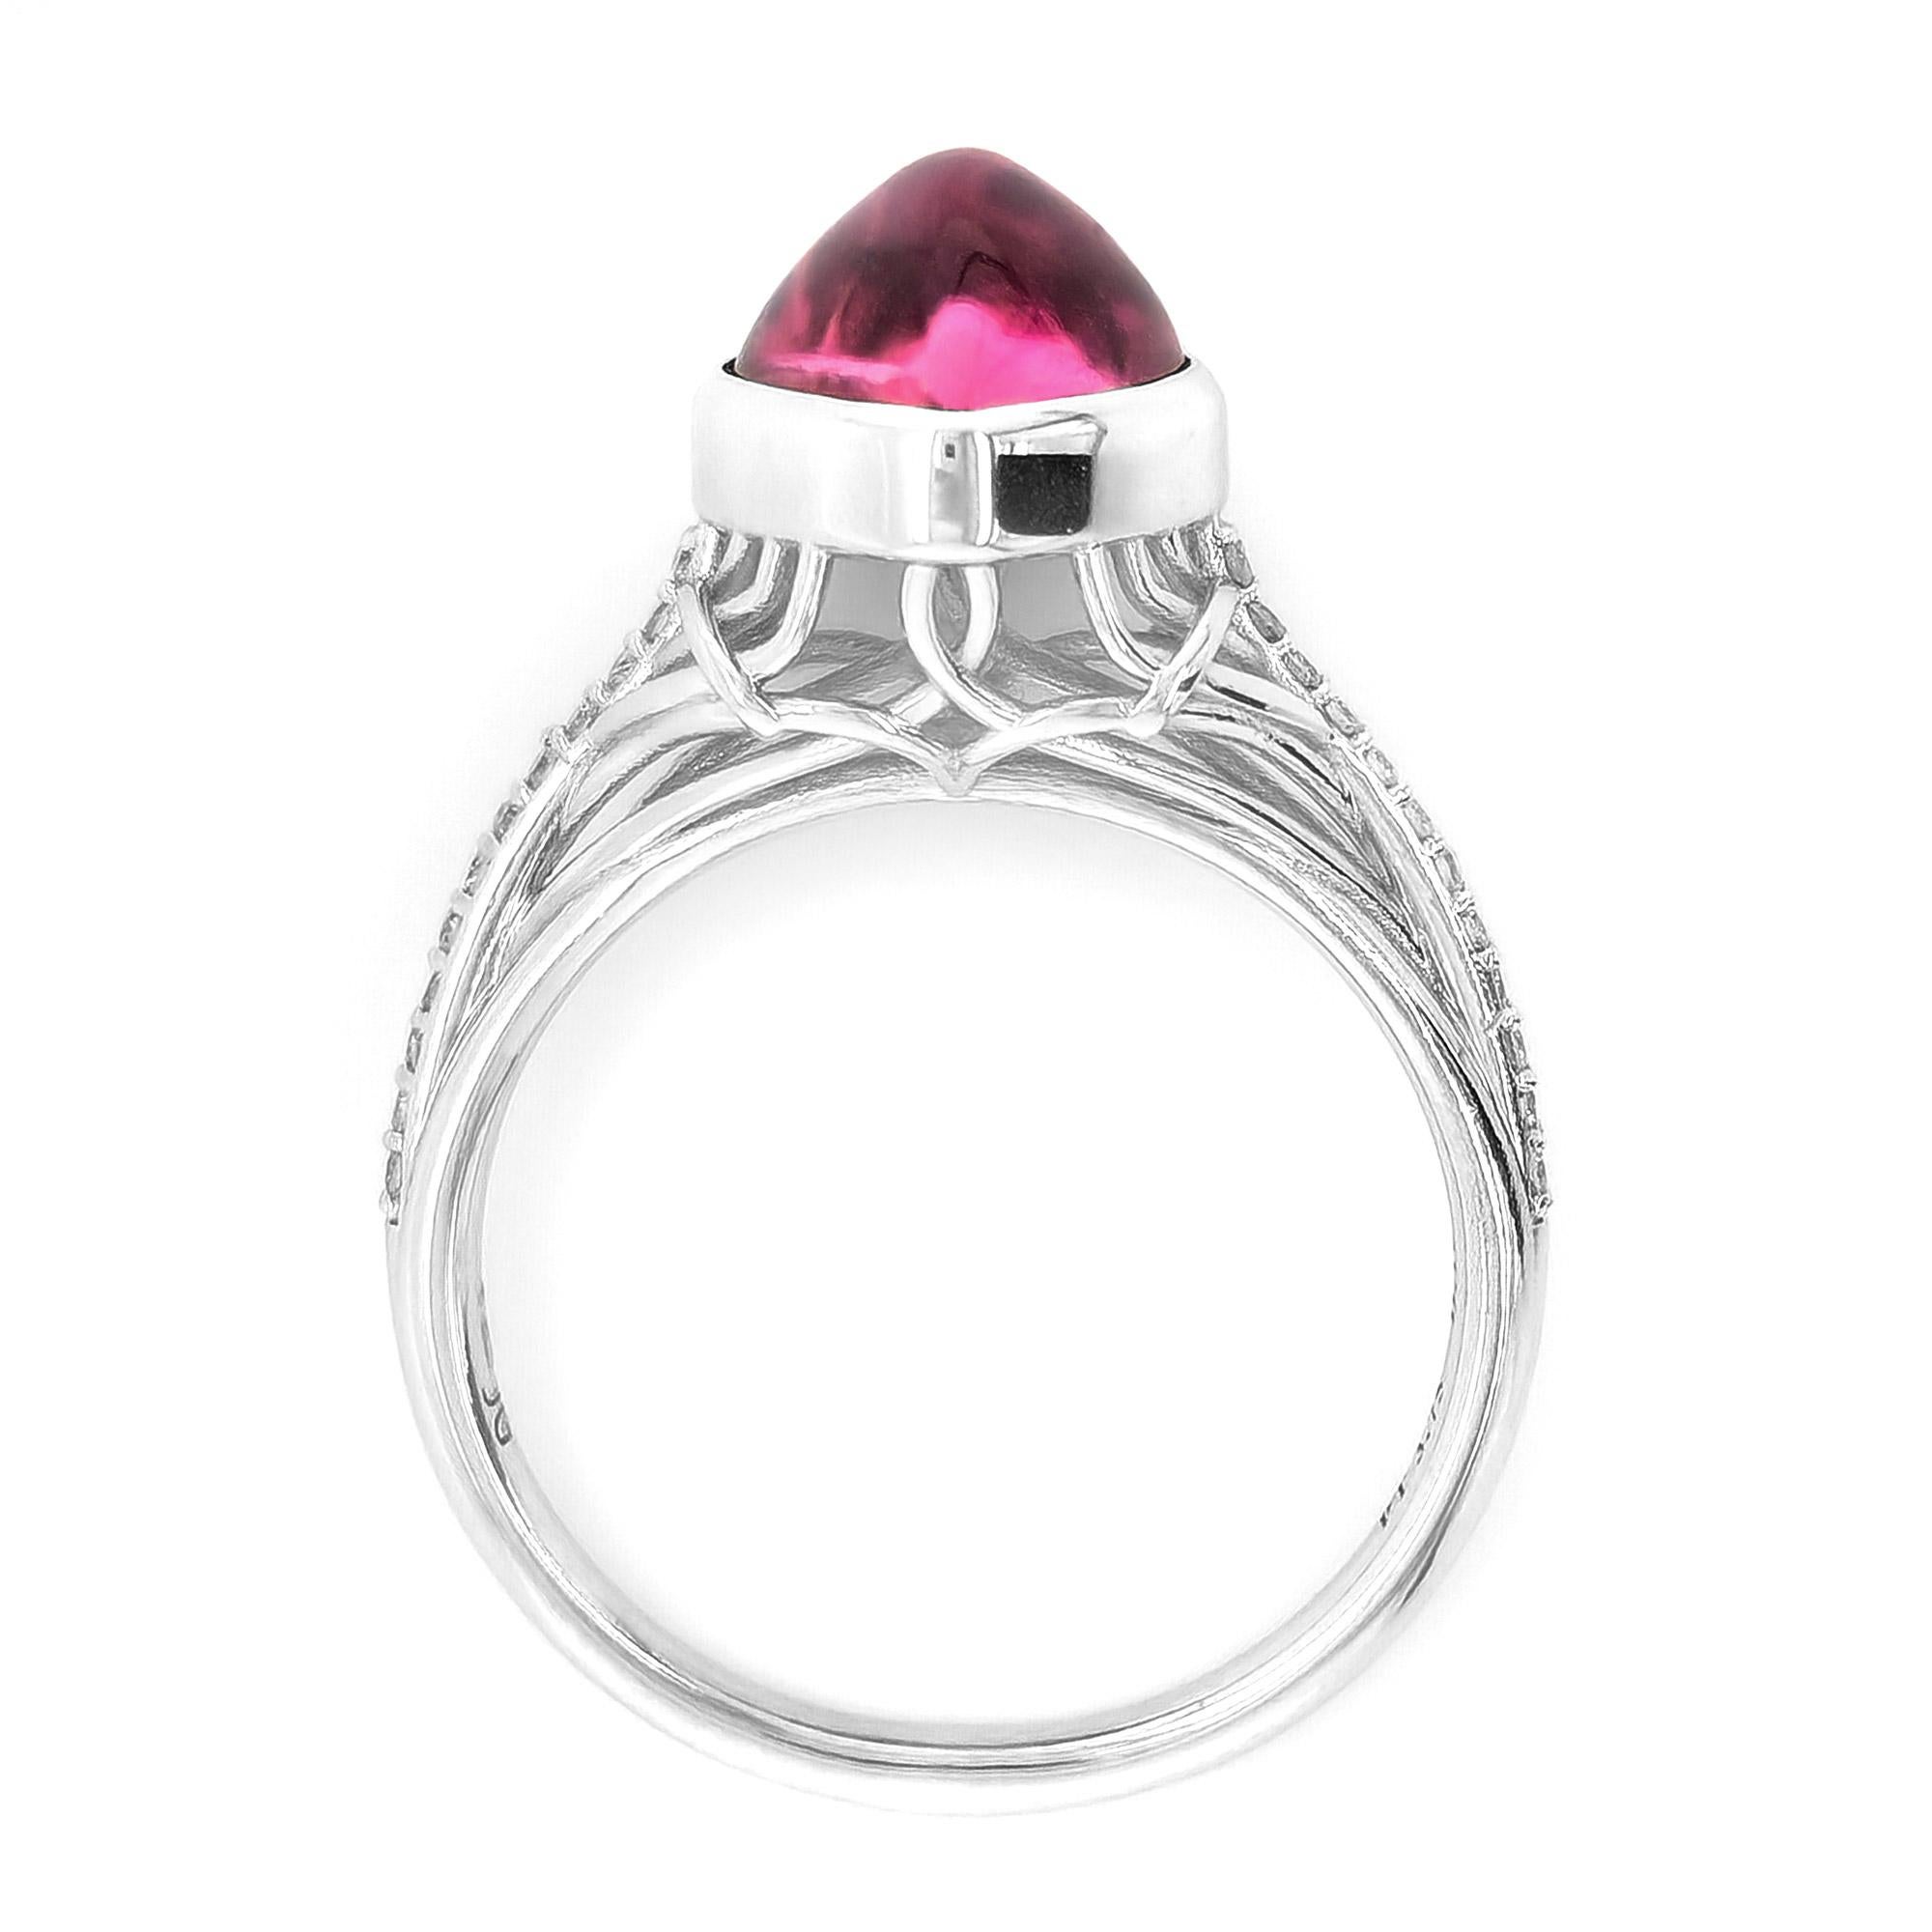 Cabochon 3.75 Сarats Pink Tourmaline Diamonds set in 18K White Gold Ring For Sale